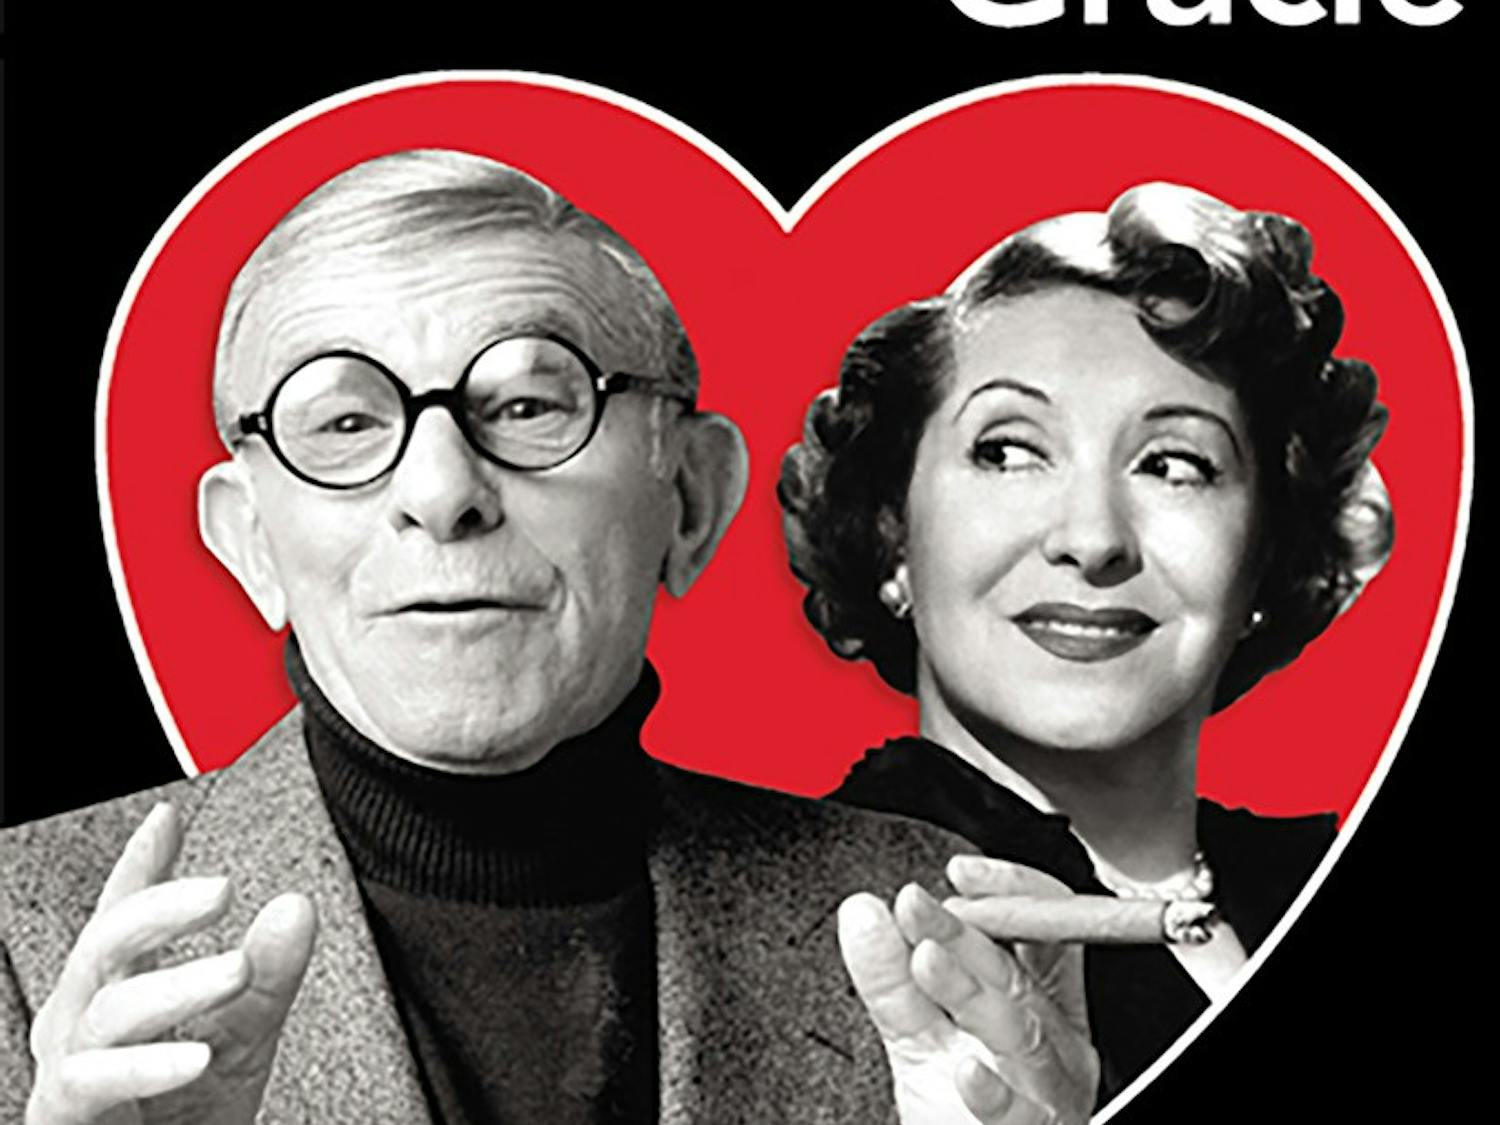 Say Goodnight Gracie focuses on George Burns, the pop culture figure from the 20th century famous for his performances in film, television, theater and radio.